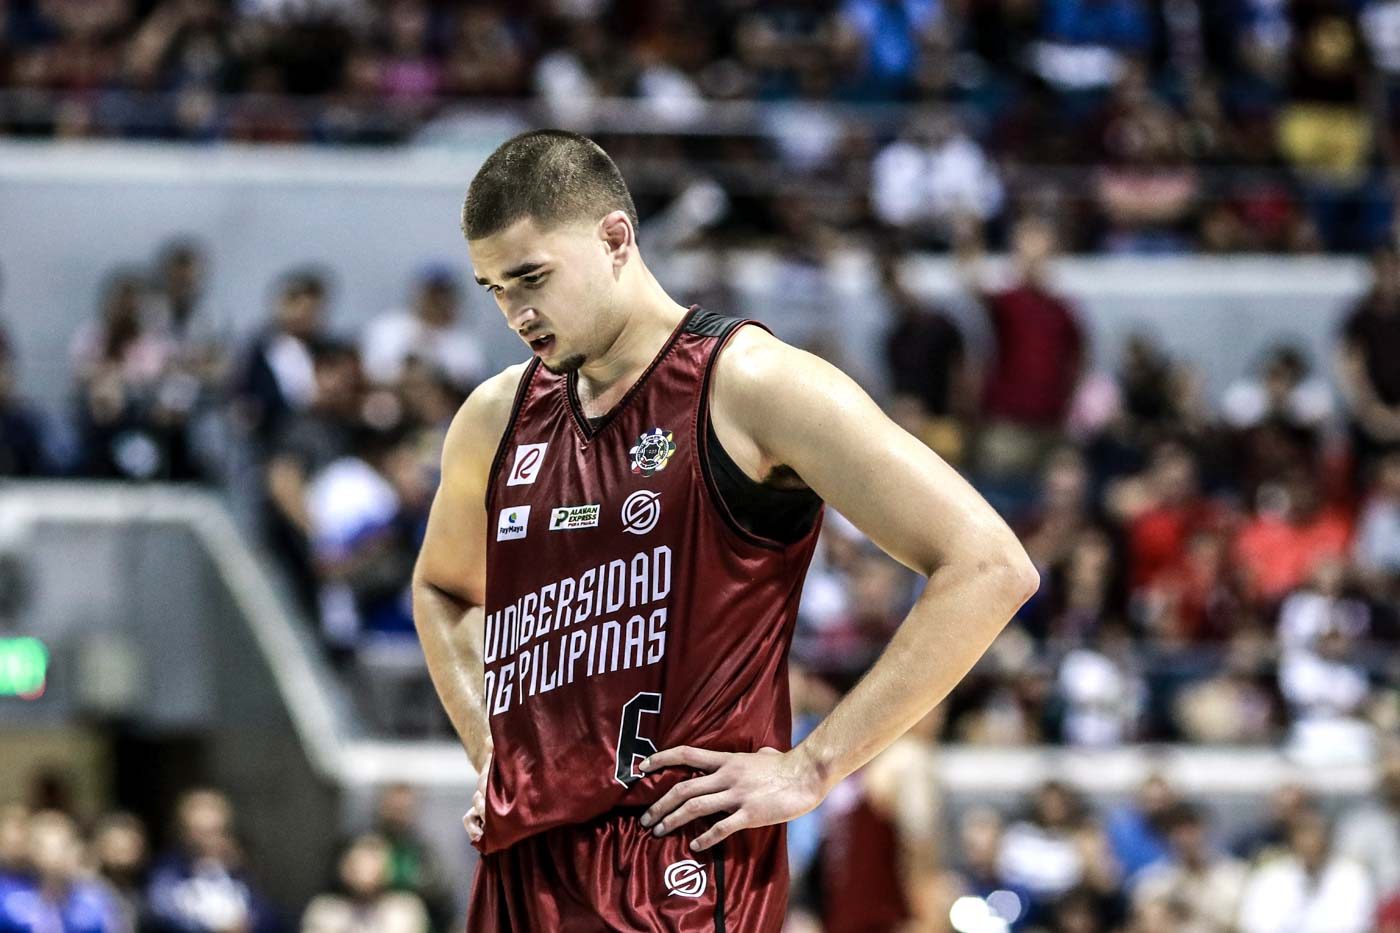 DEJECTED. UP stalwart Kobe Paras again drops a team-high 15 points but can't quite turn things around for the UP Maroons. Photo by Michael Gatpandan/Rappler  